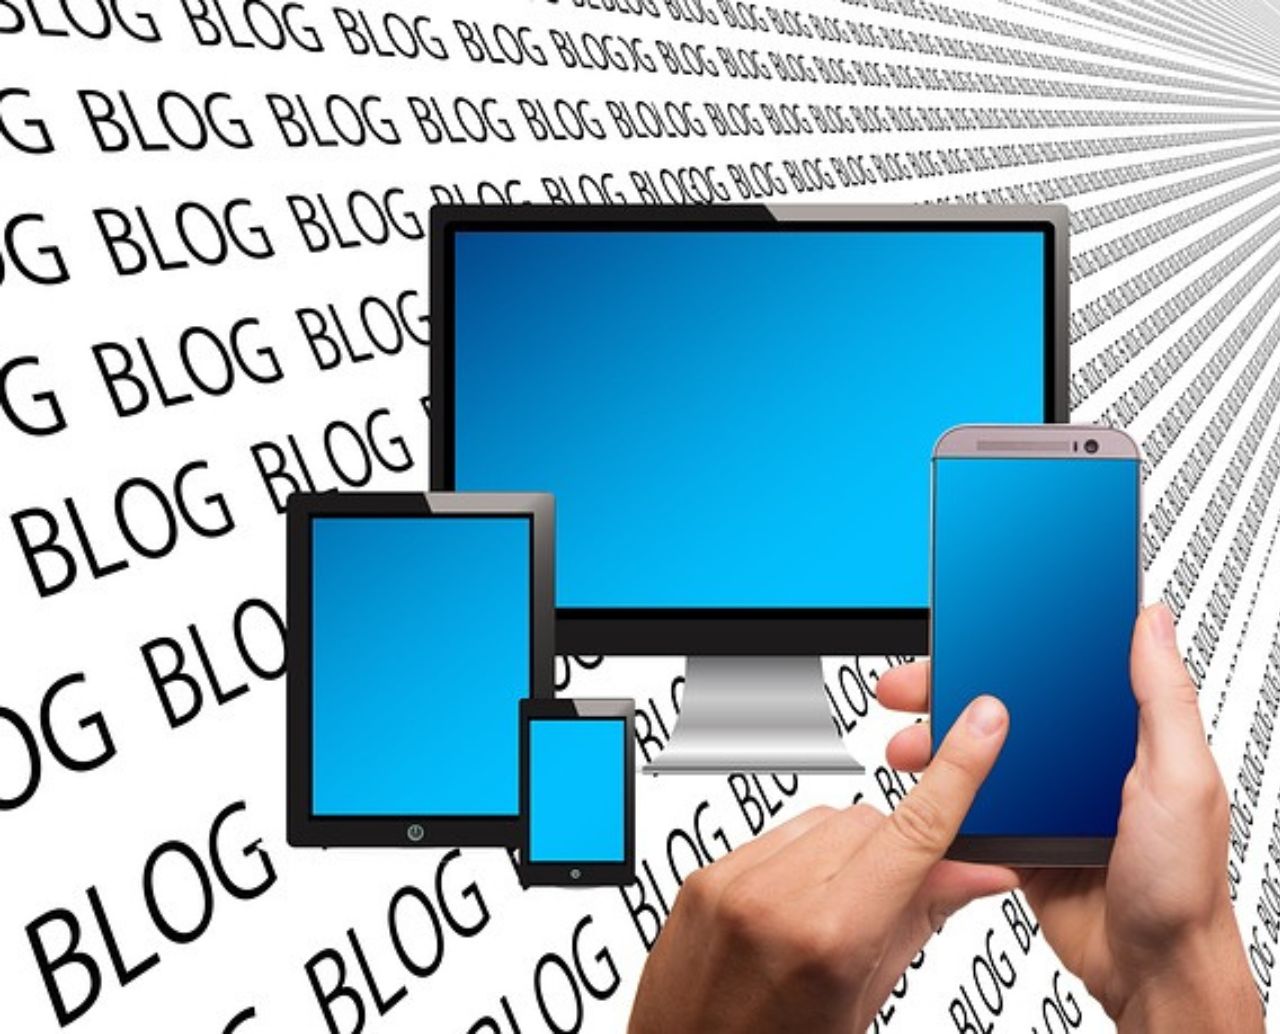 blog and seo services image that shows the word blog and different screen sizes